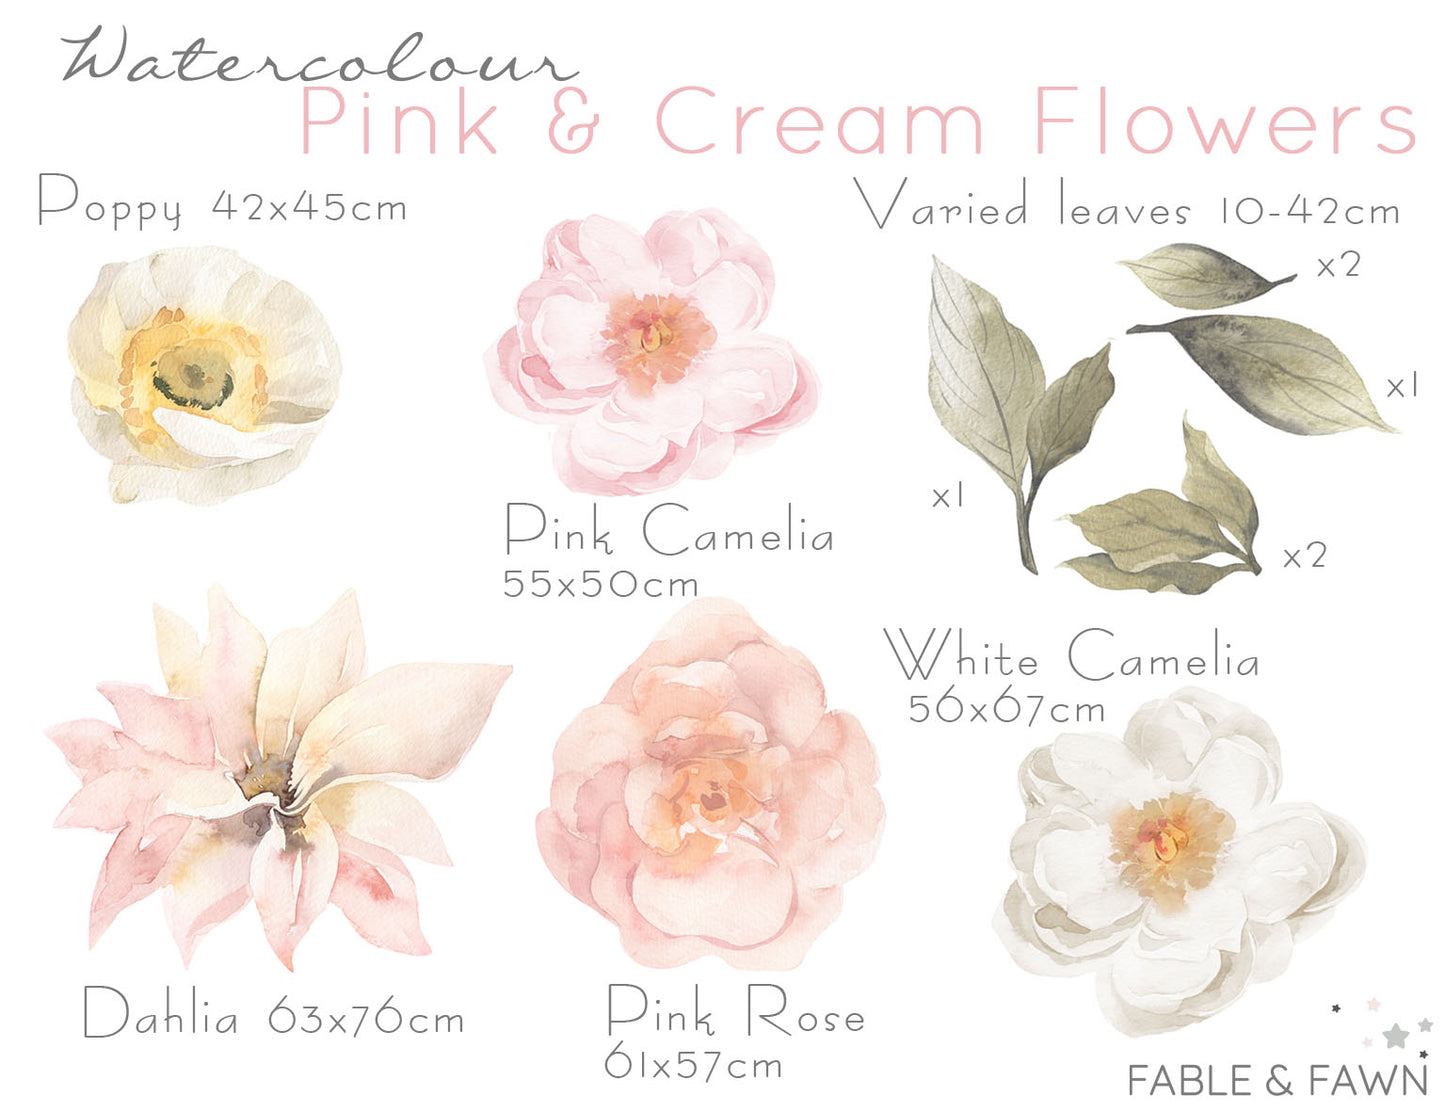 Pink and Cream Flower Wall Decals - Wall Decals - Fable and Fawn 